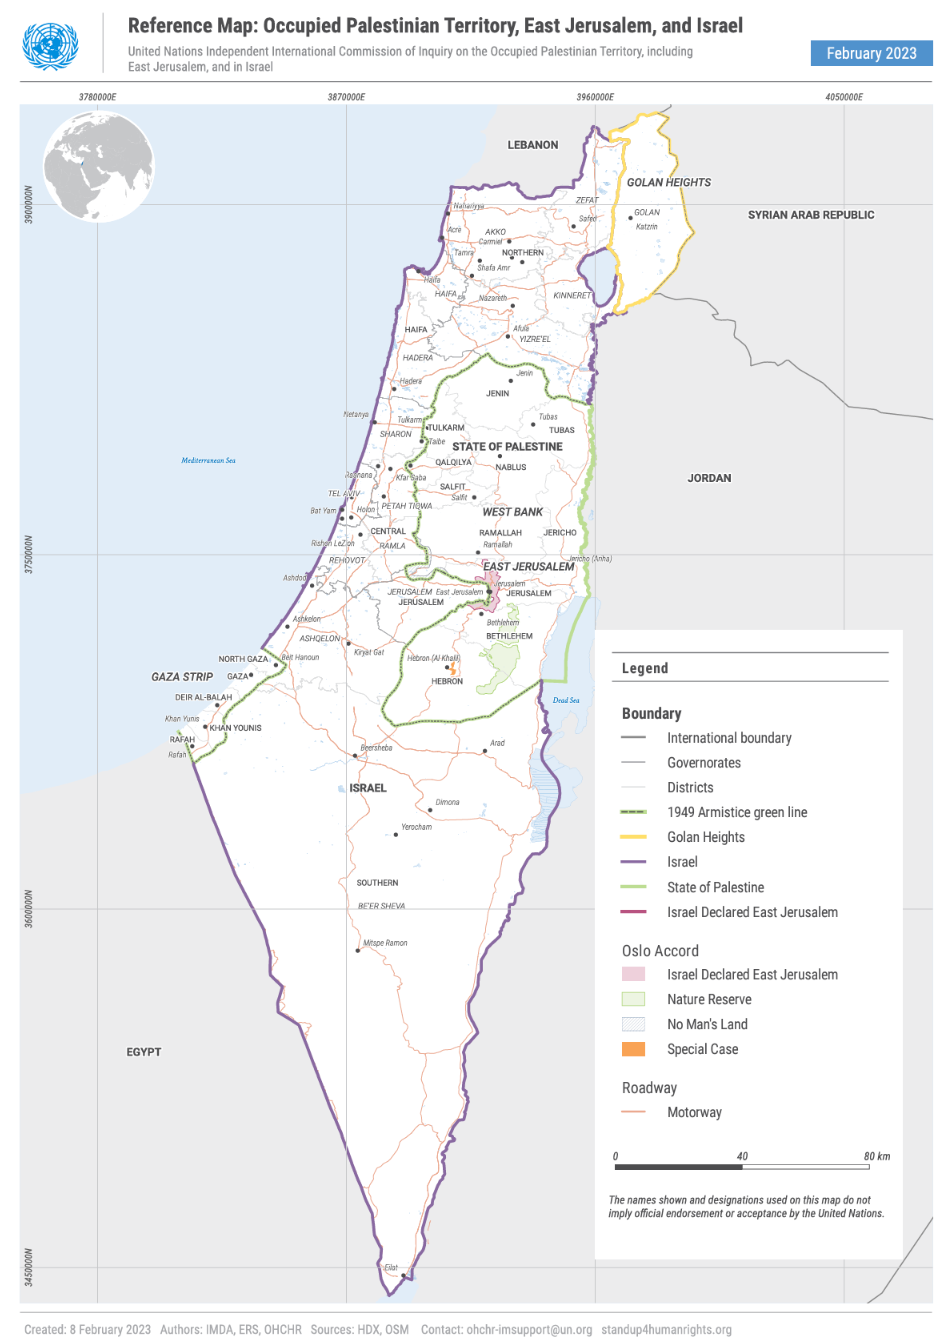 ICJ calls Israeli occupation of lands an illegal annexation and apartheid